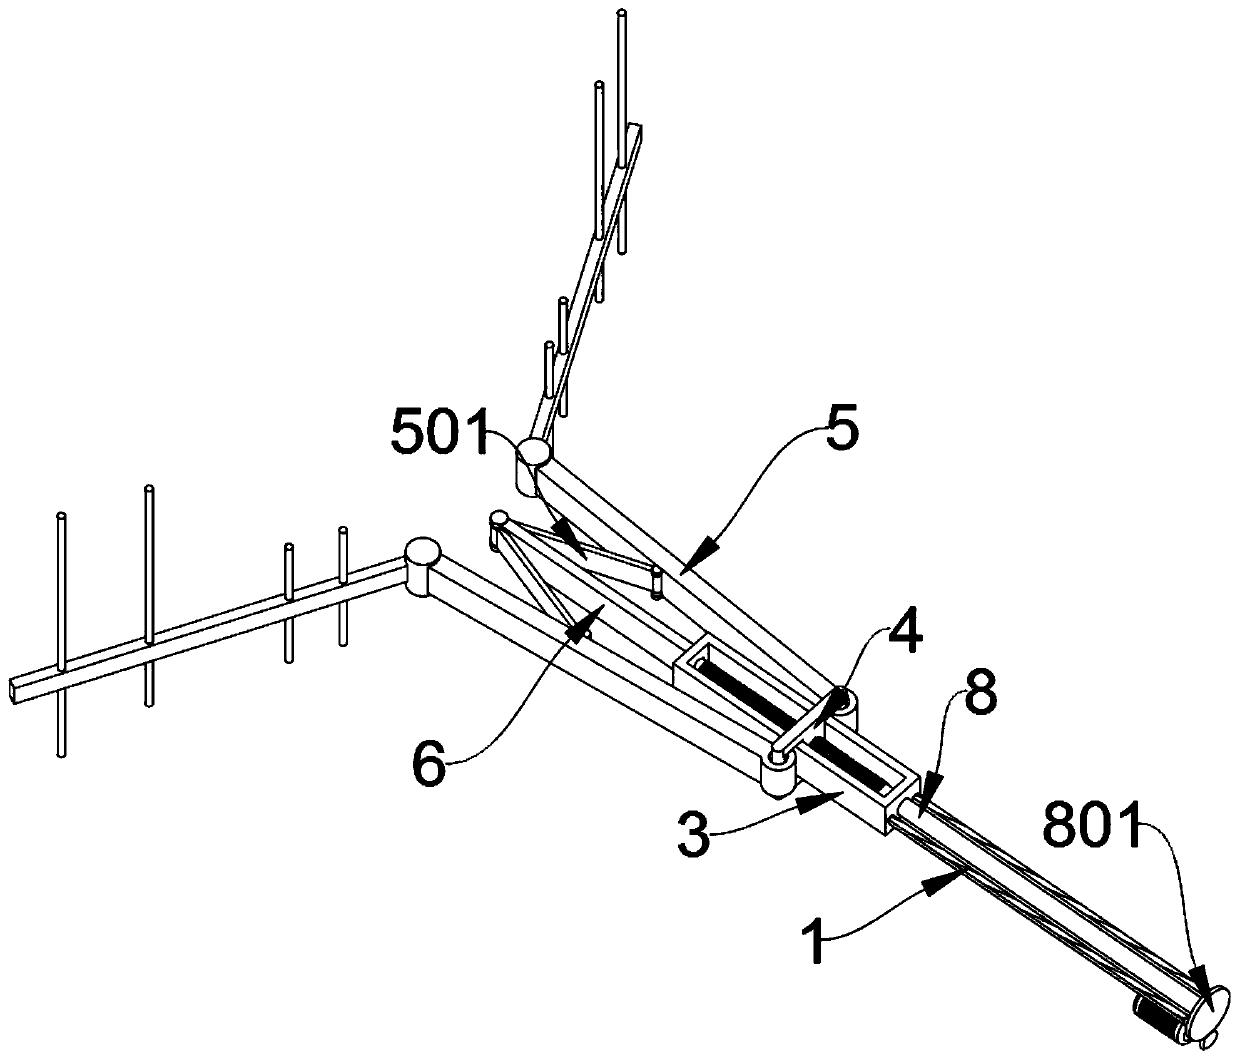 Antenna support for electronic product detection equipment